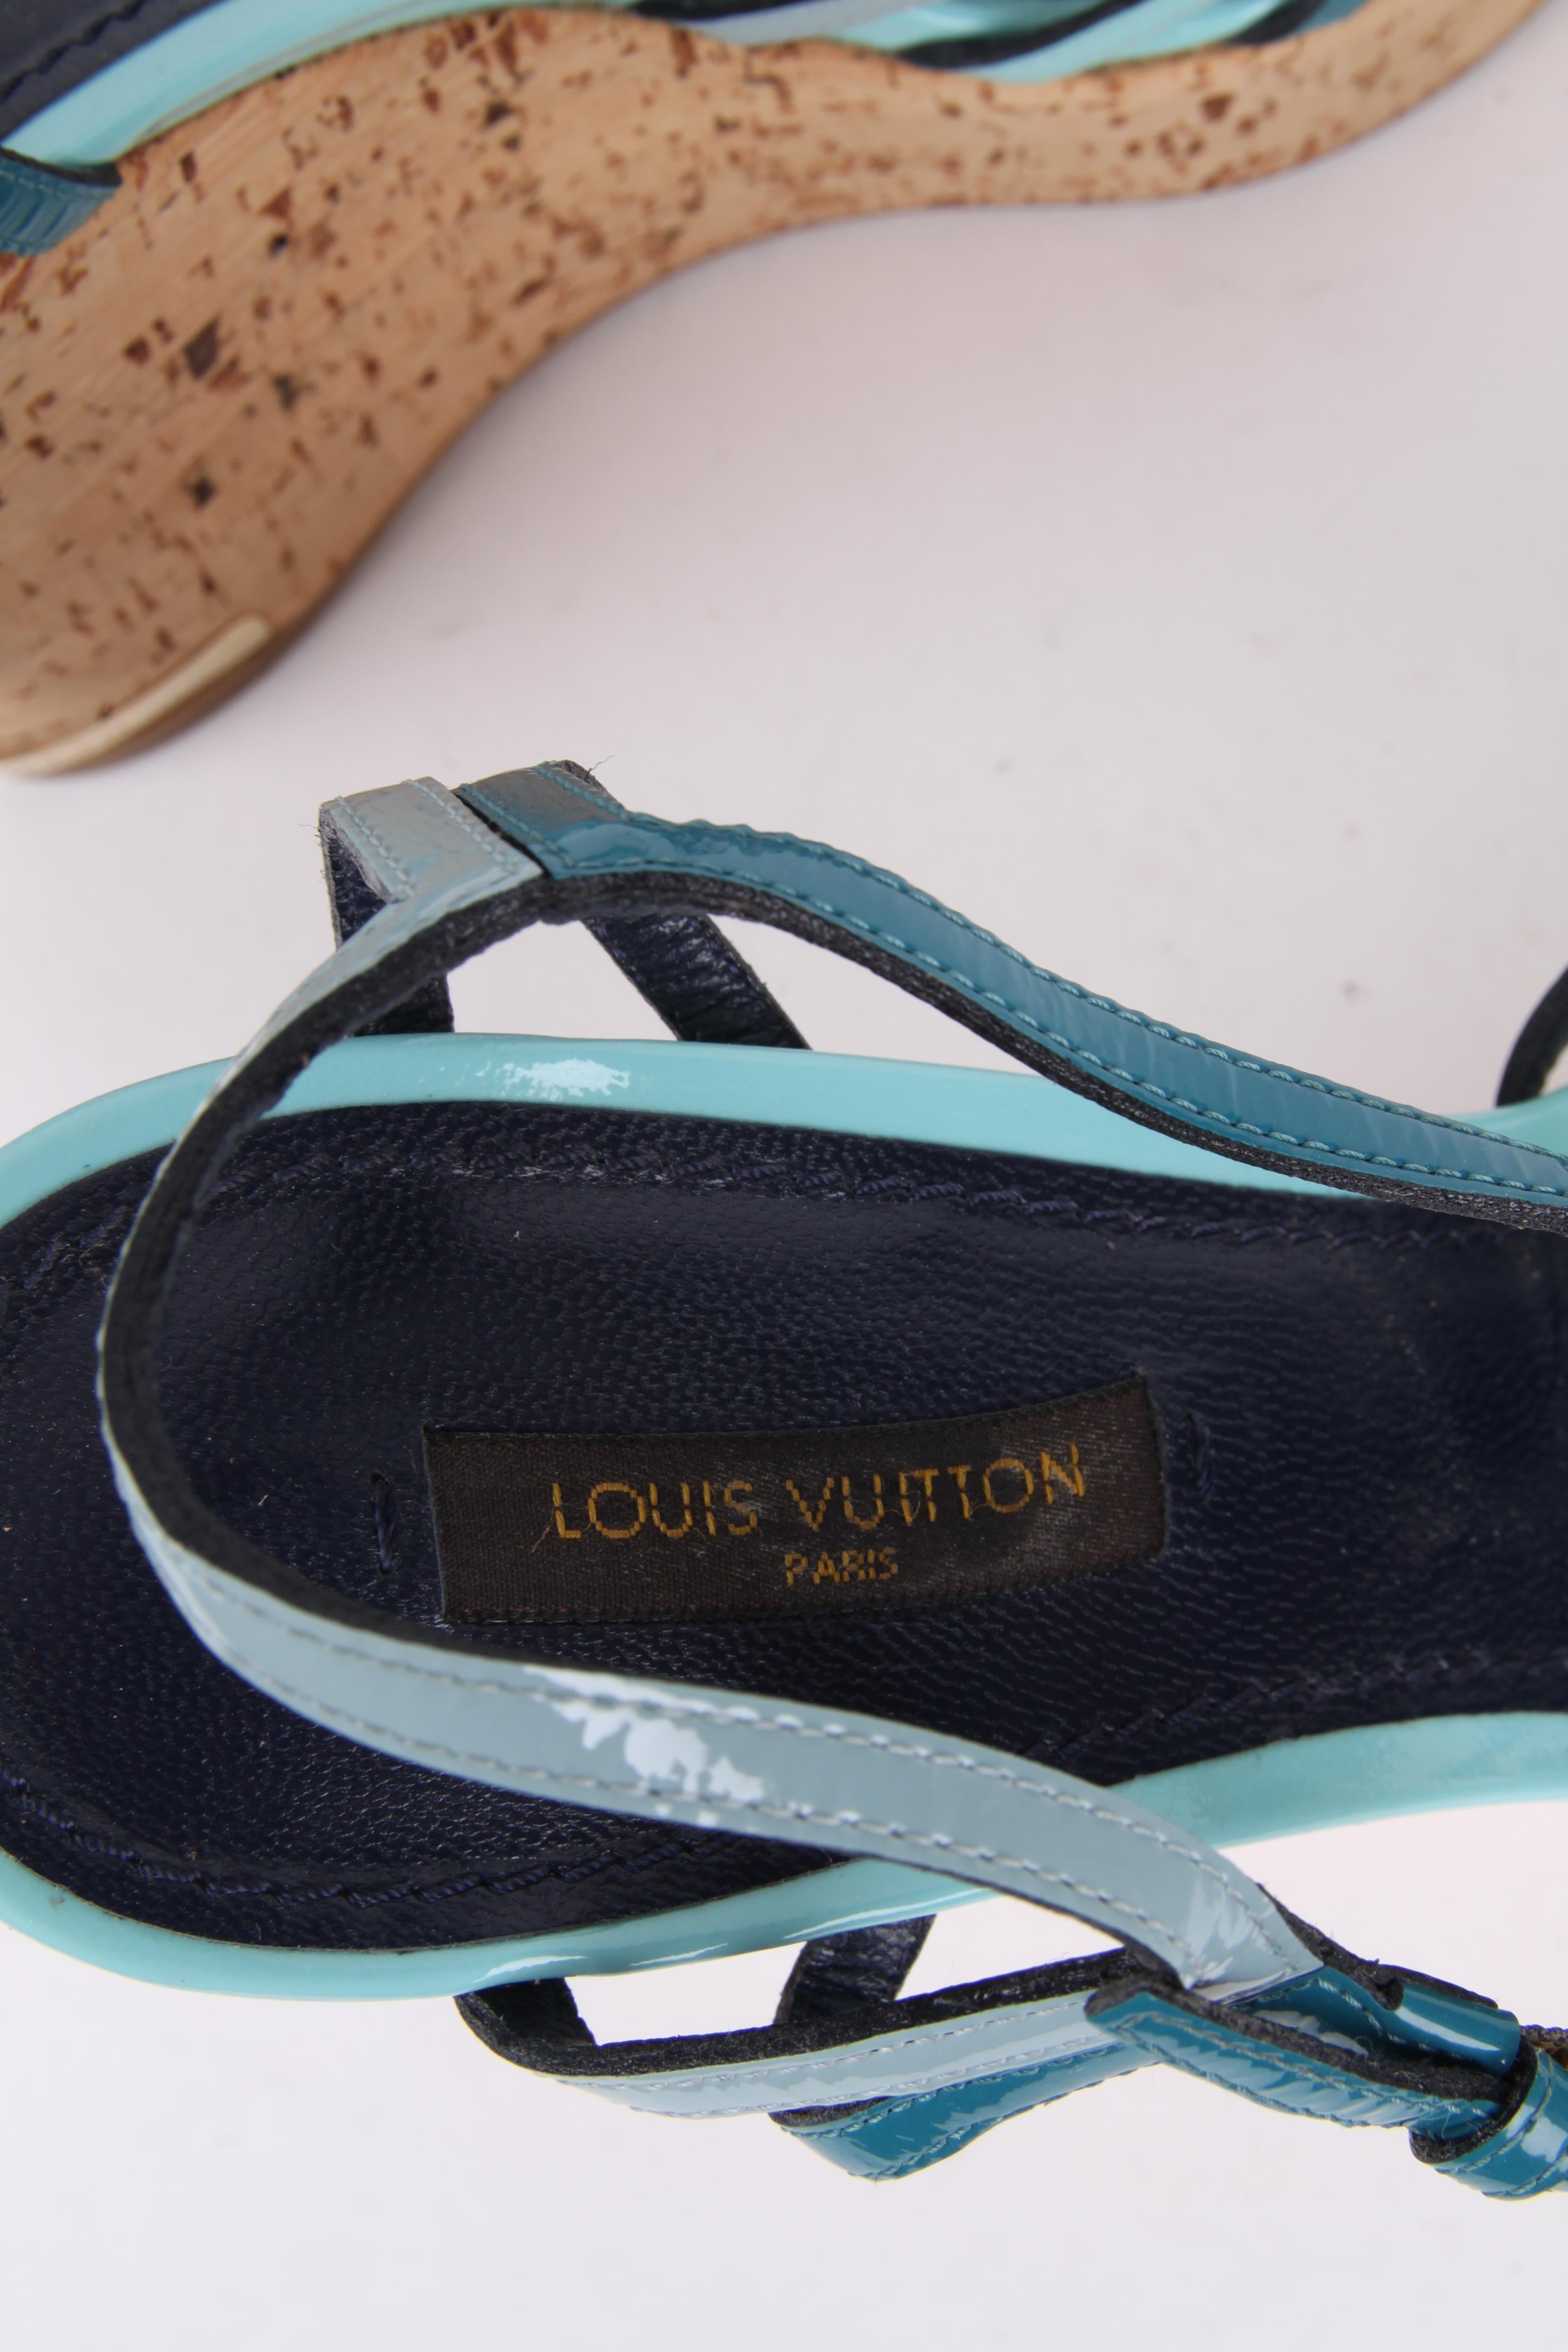 Louis Vuitton Blue Patent Leather Summertime Cork Wedges For Sale 2